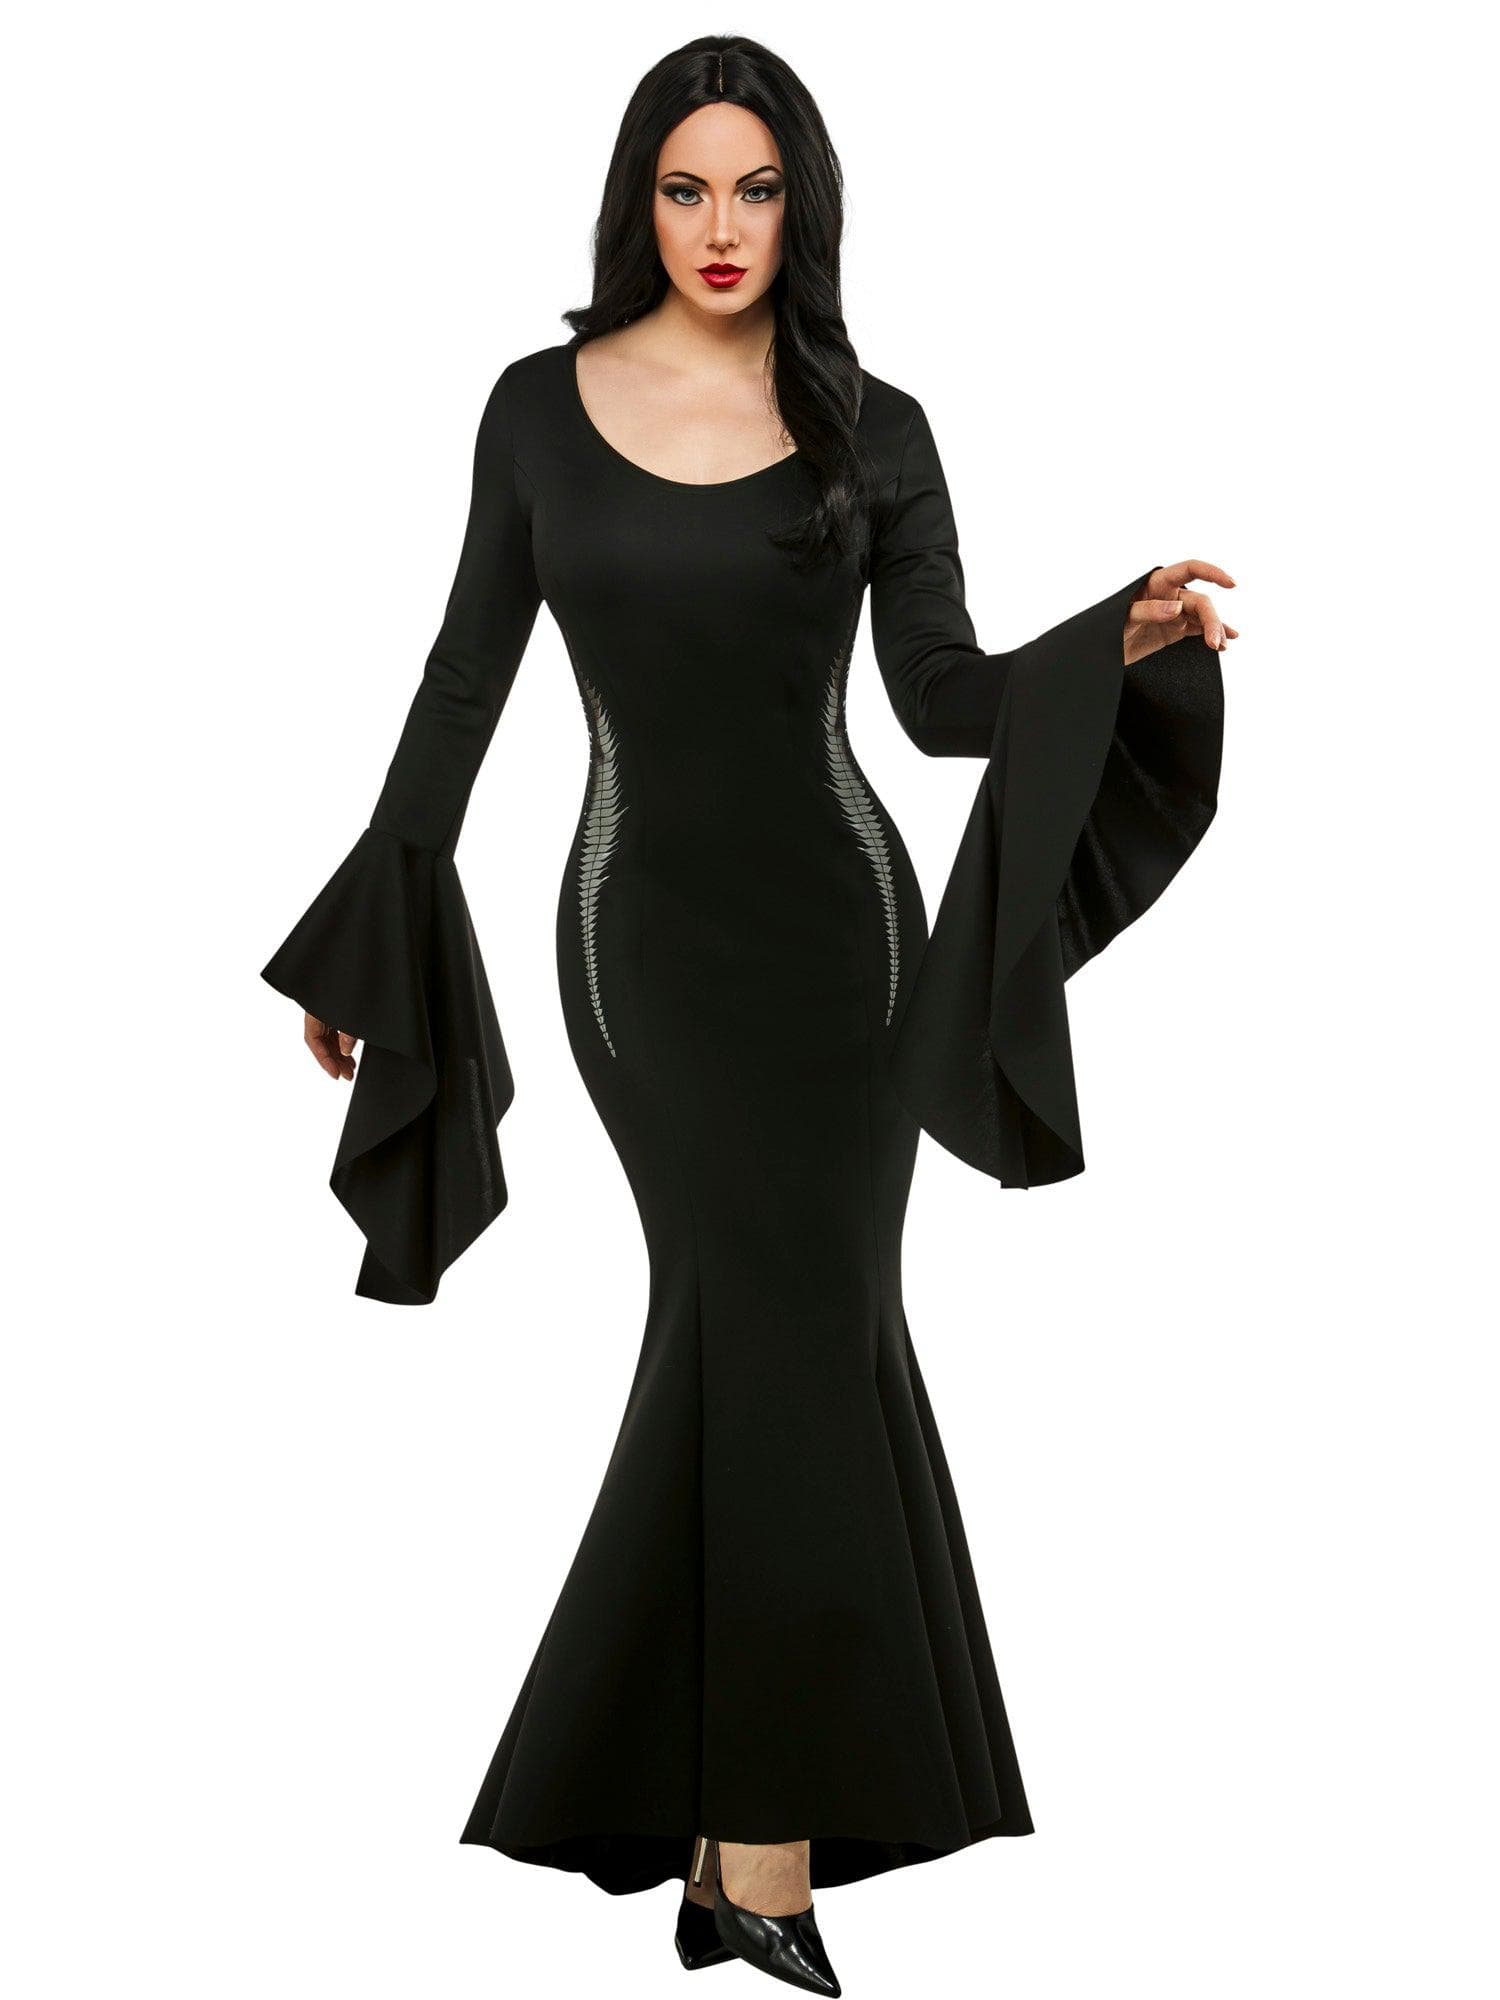 Wednesday Nevermore Academy Morticia Addams Adult Costume - costumes.com